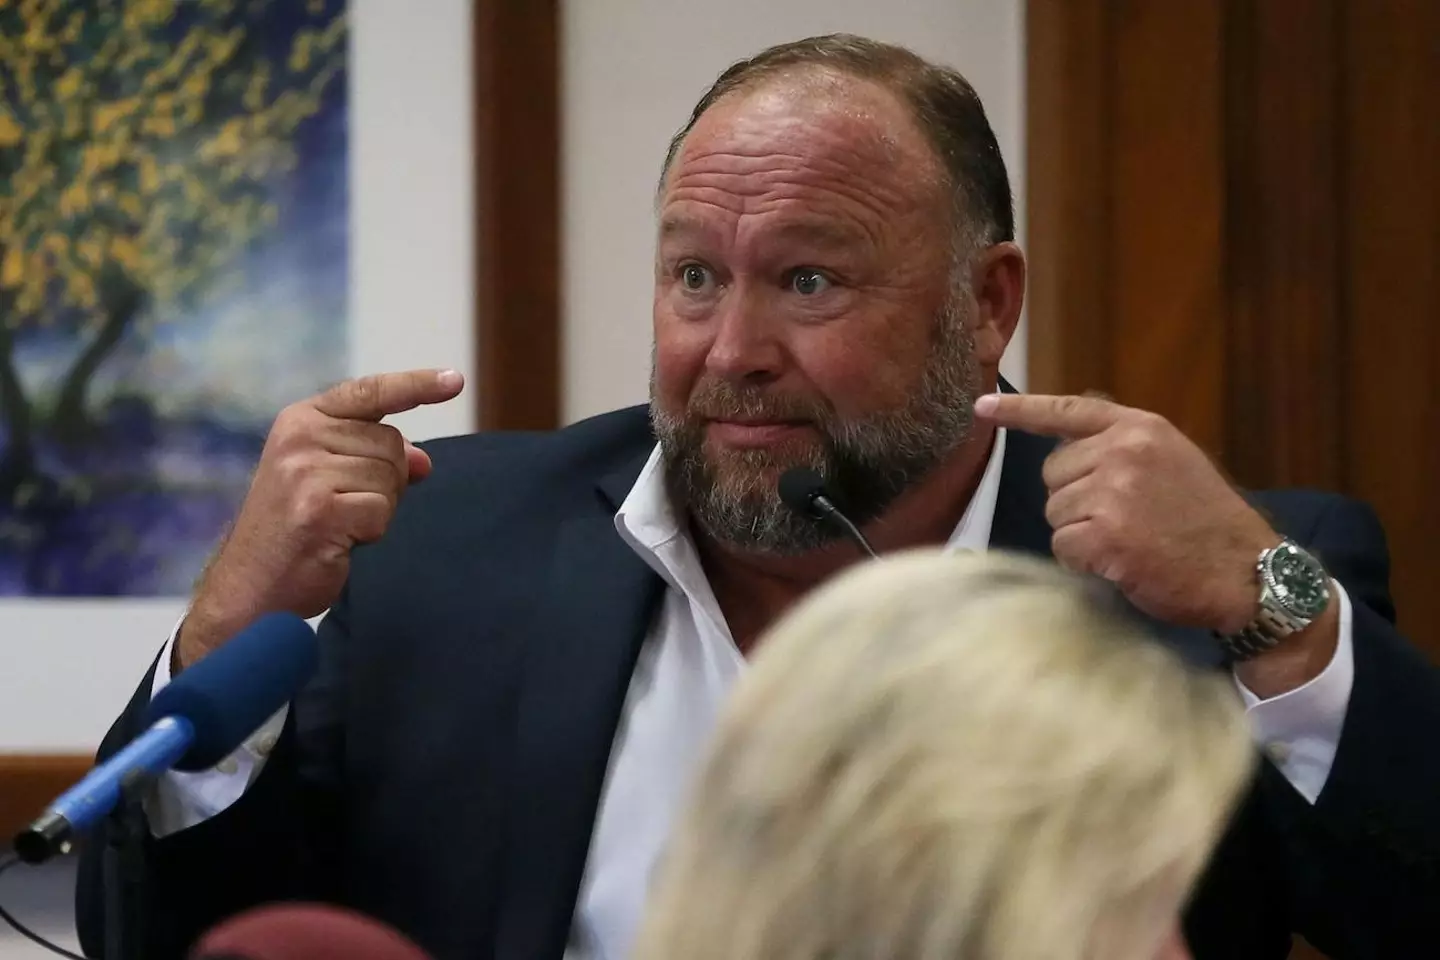 Alex Jones has been forced to pay millions in damages to parents of Sandy Hook Elementary School.